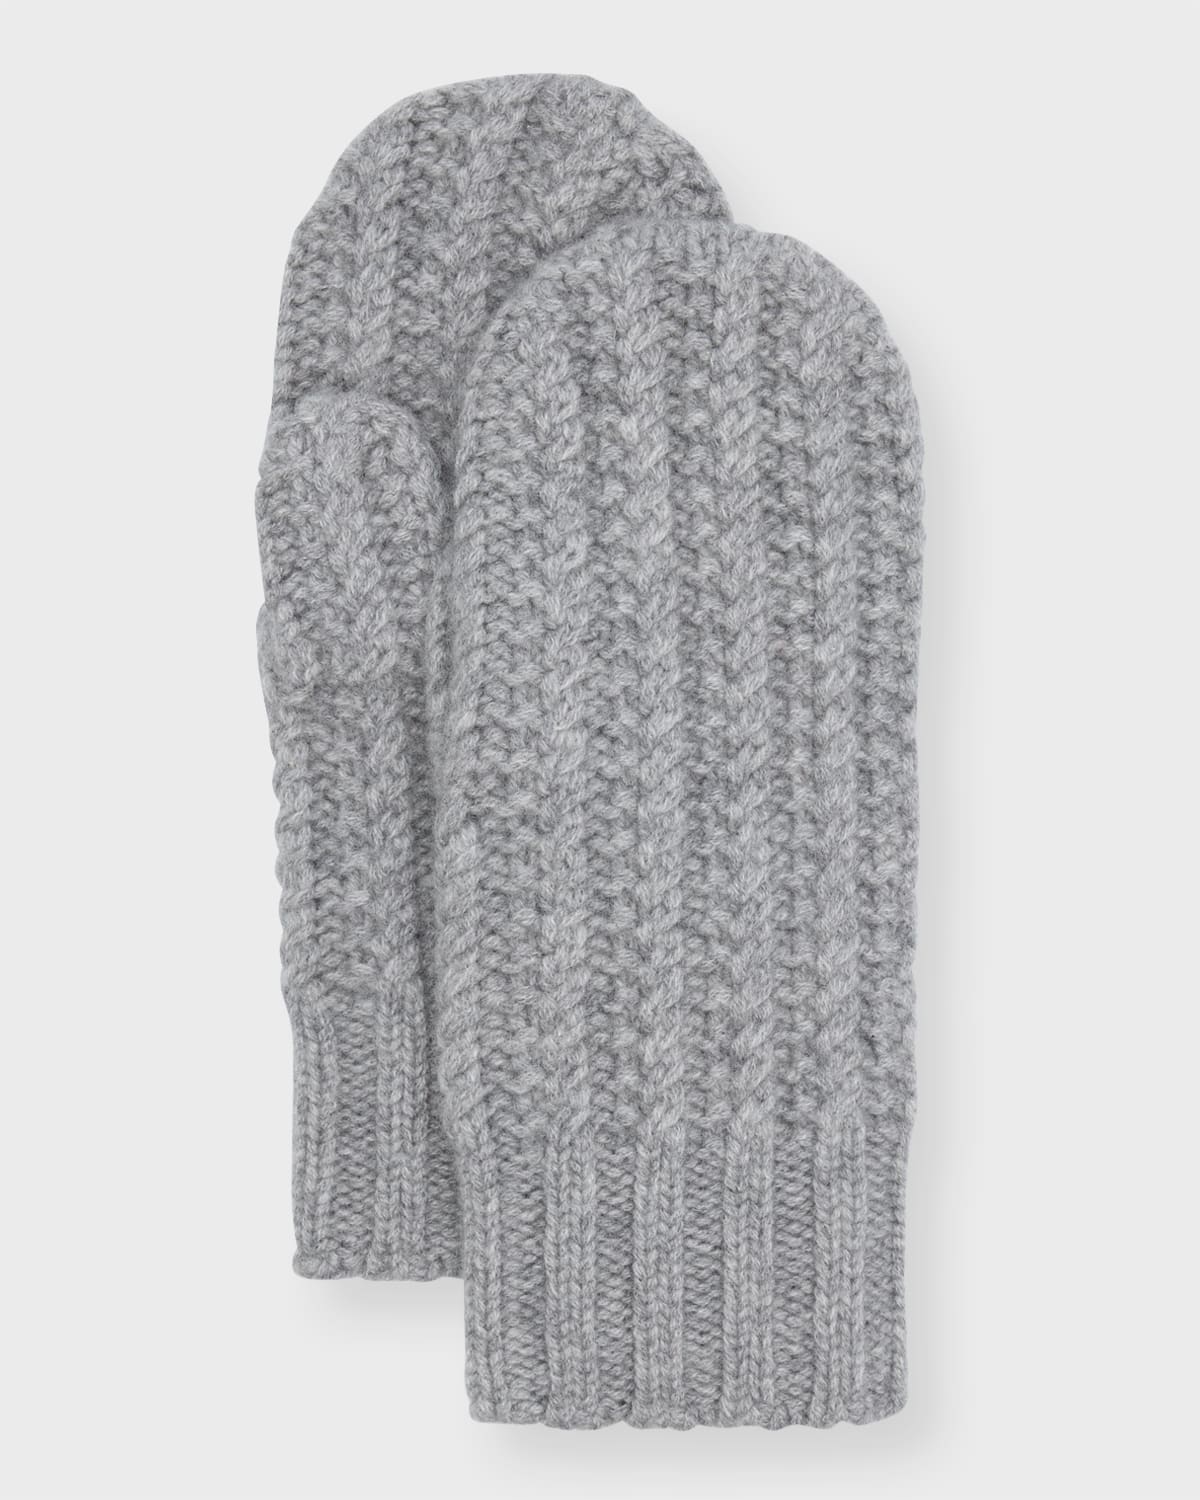 Sofia Cashmere Chunky Textured Cashmere Mittens In Grey